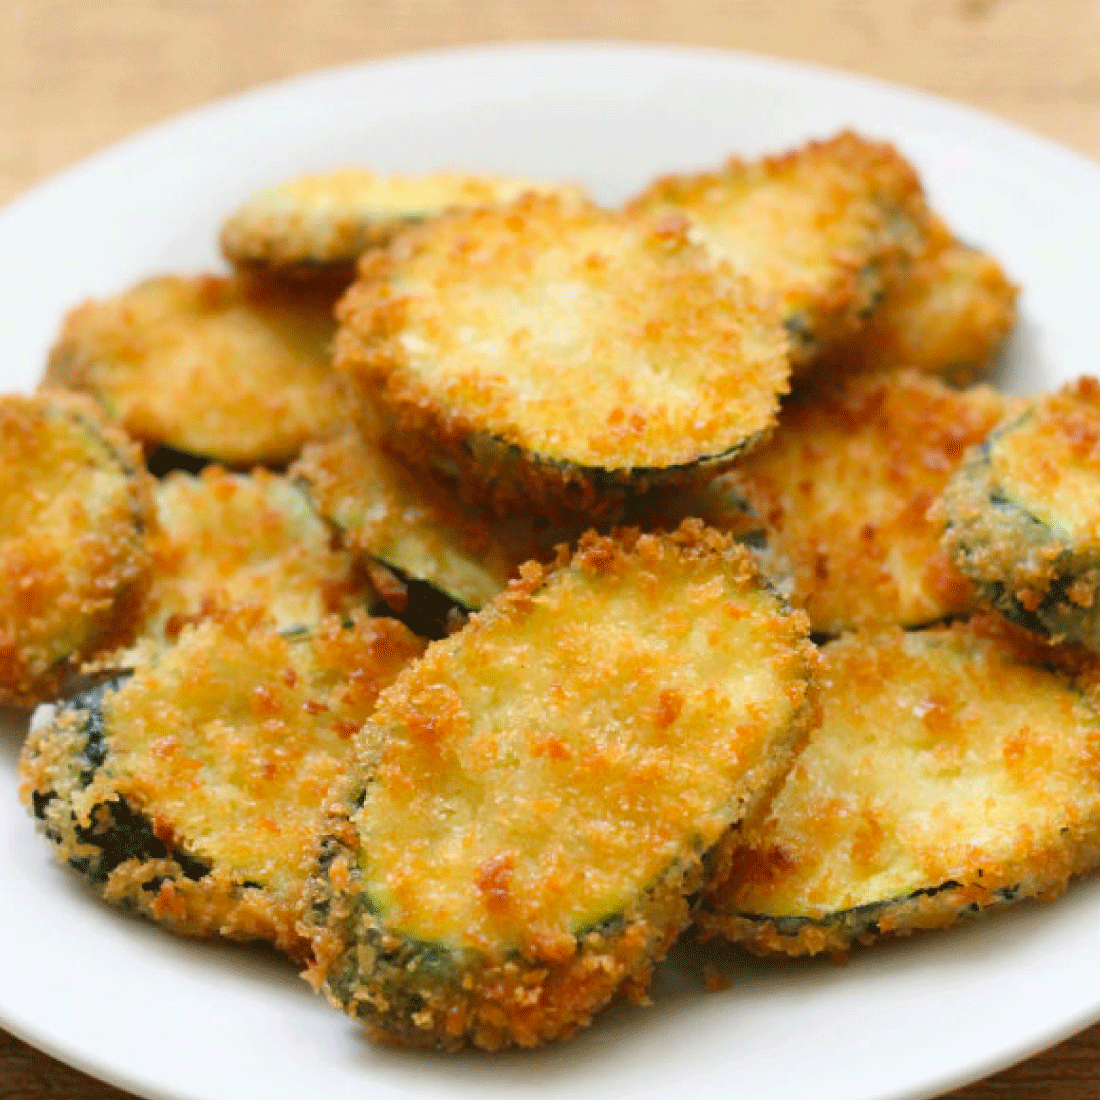 Appetizer Recipes - a round up of the very best. Featuring fried zucchini.